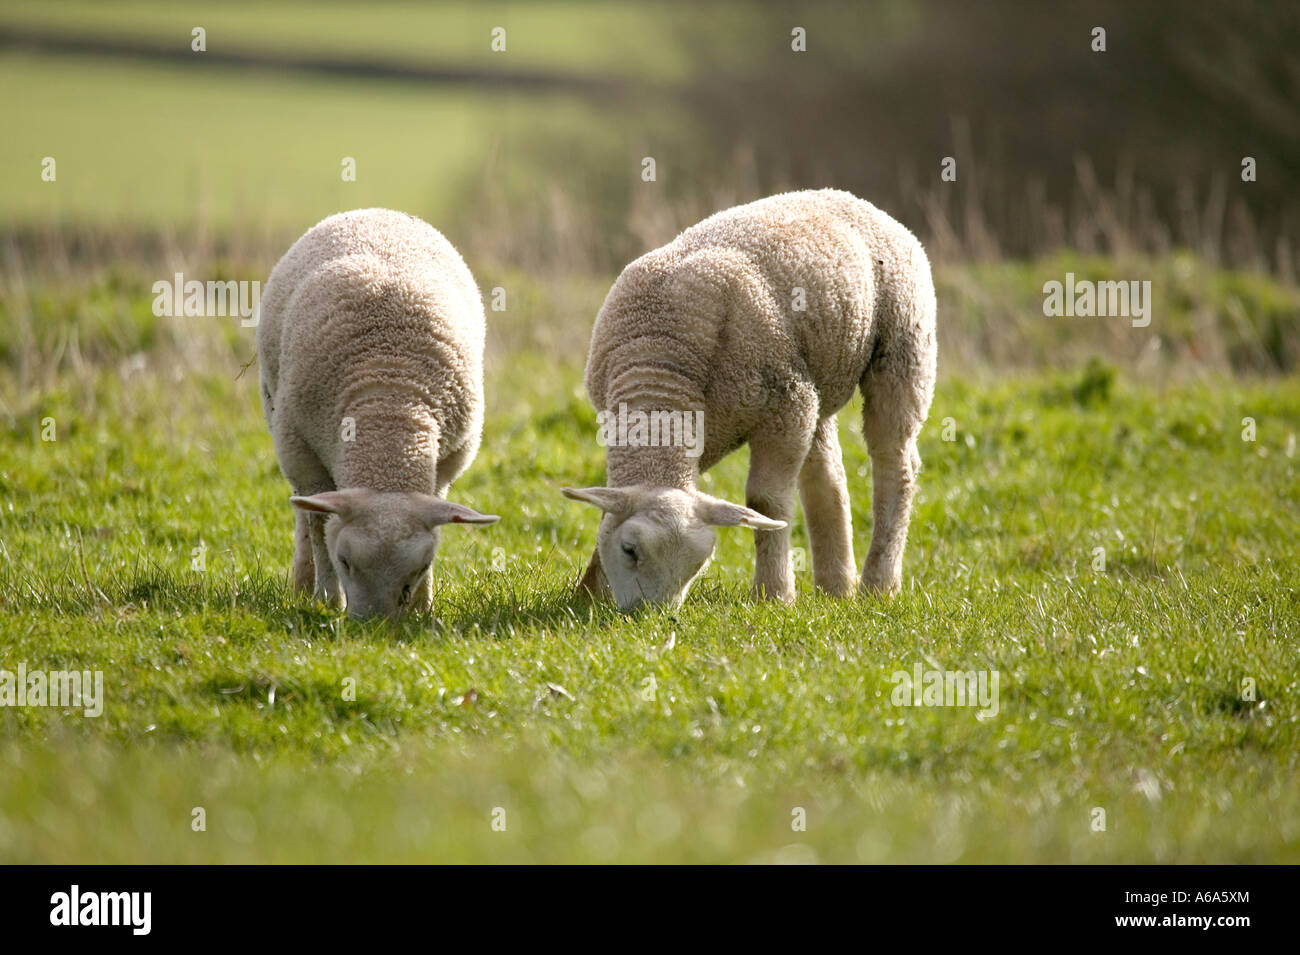 Two baby lambs grazing on grass in the spring sunshine Stock Photo